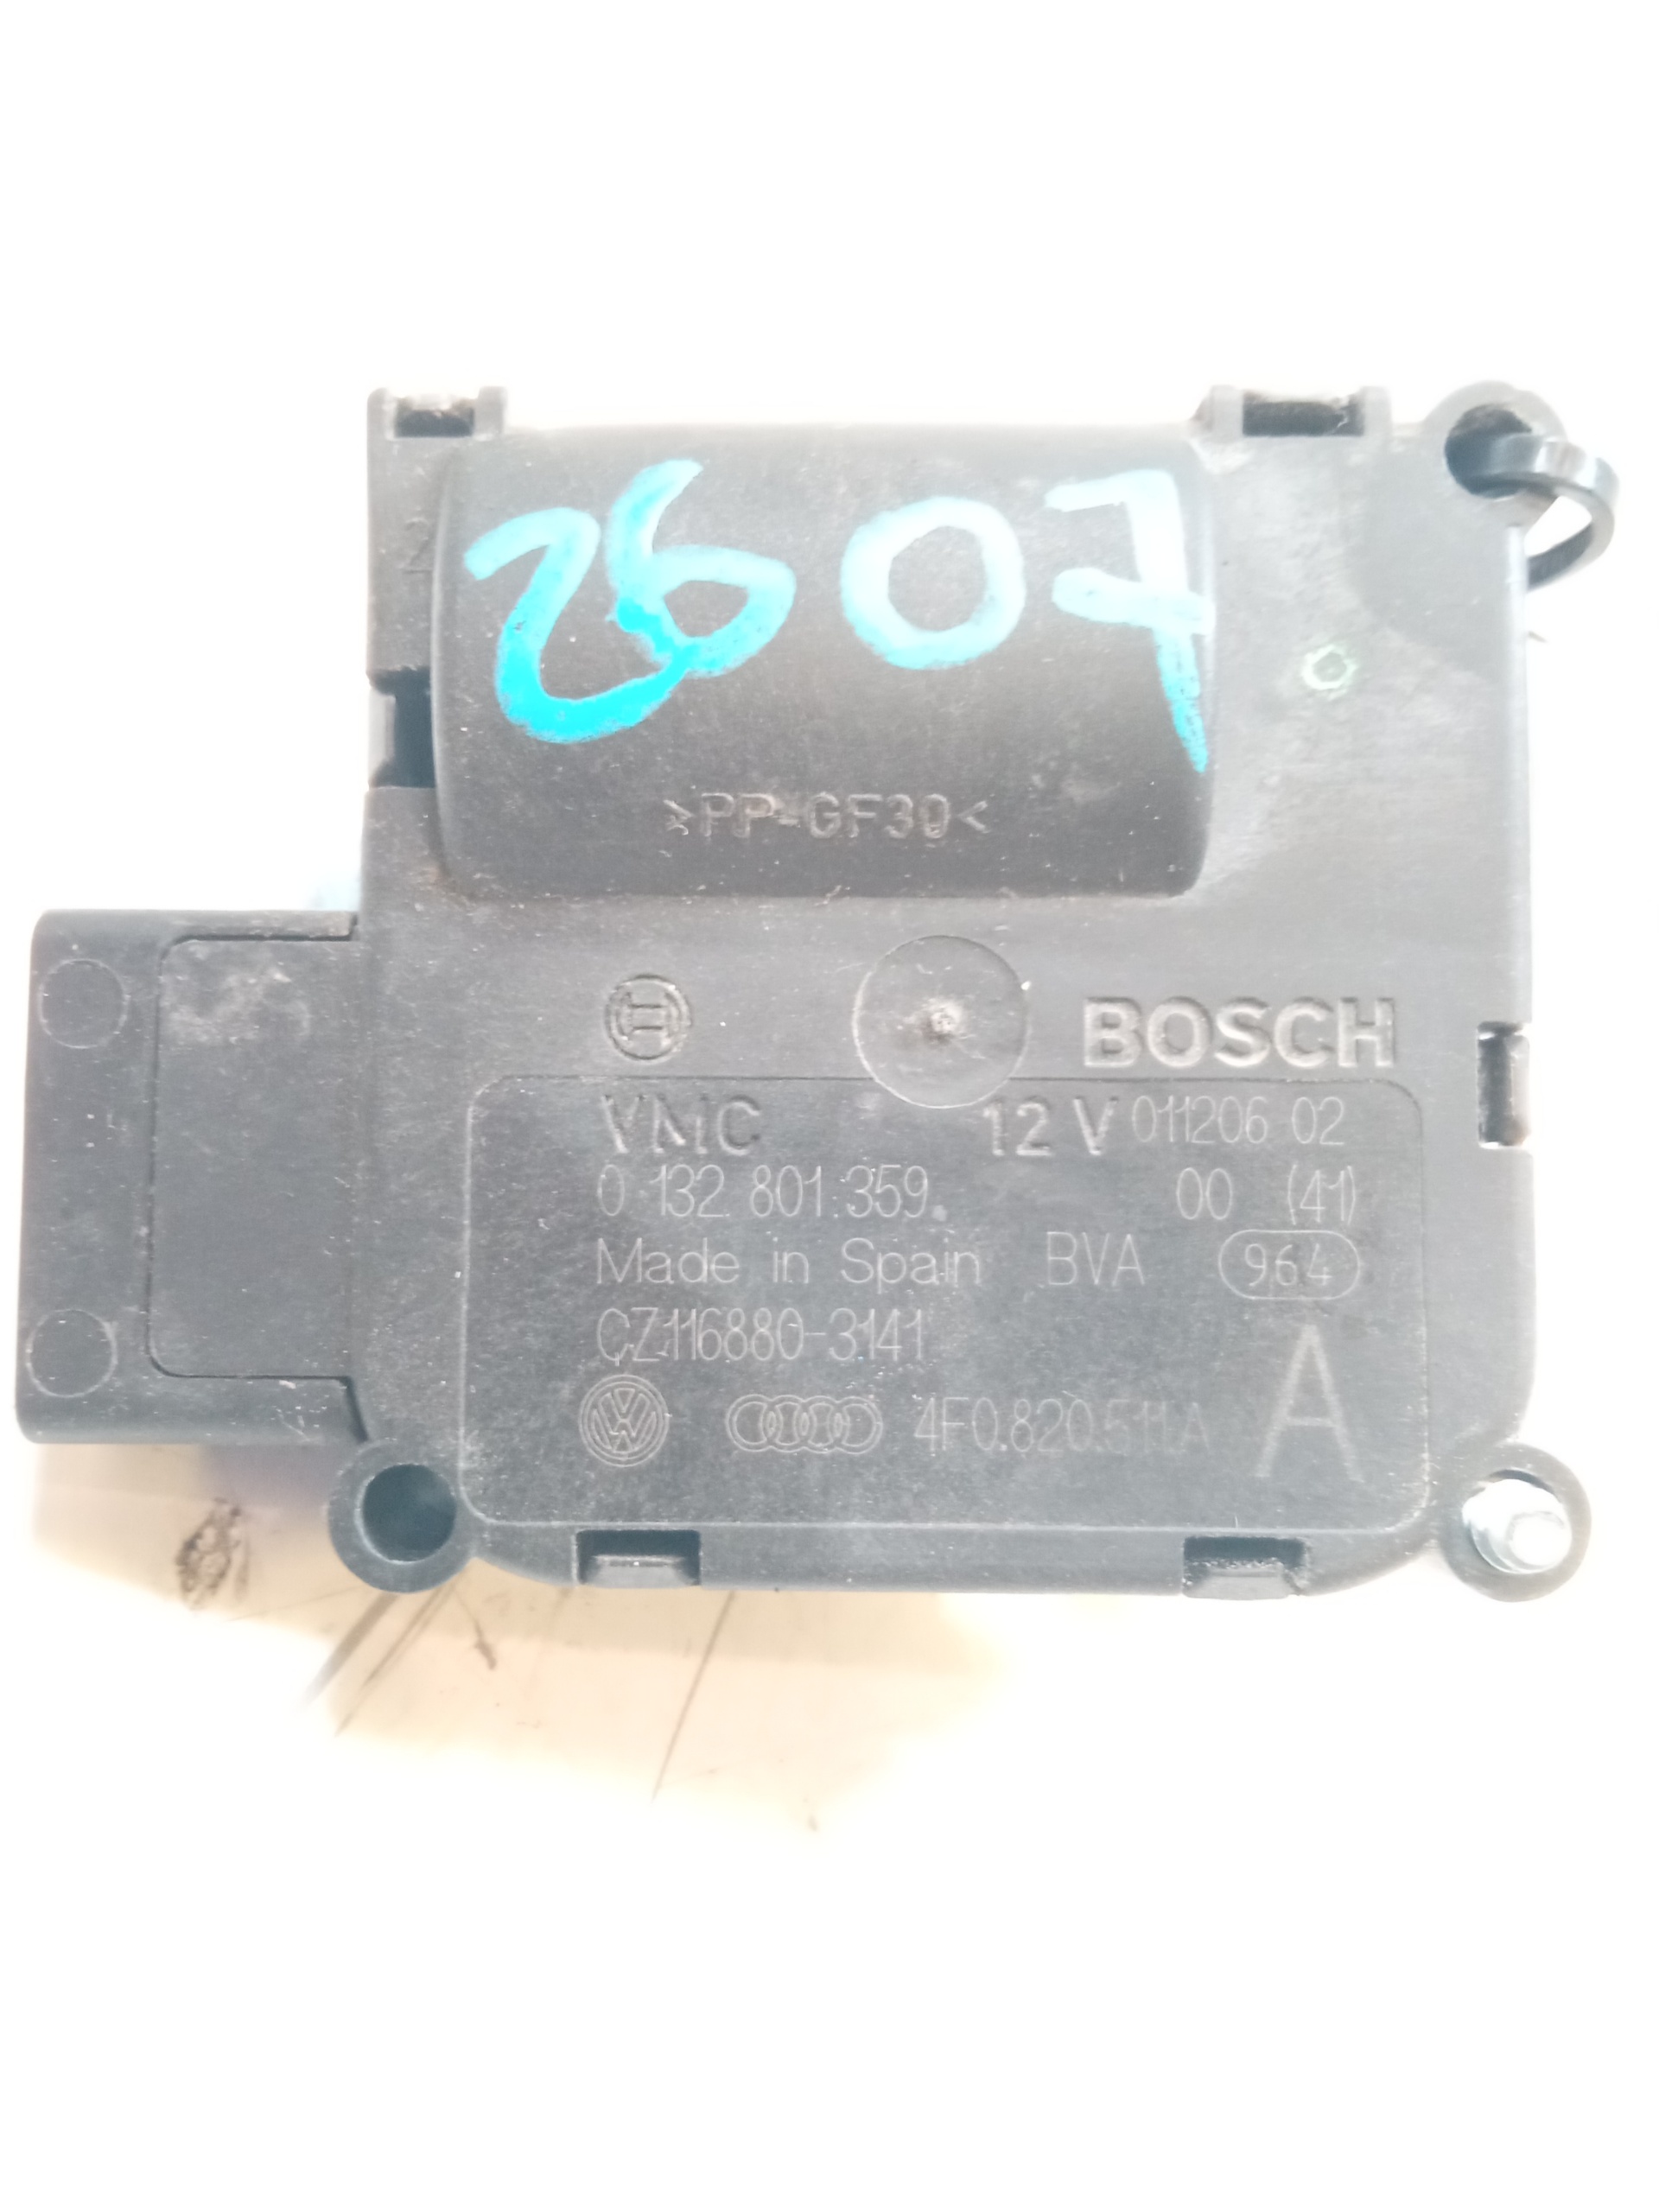 AUDI A6 C6/4F (2004-2011) Air Conditioner Air Flow Valve Motor 4F0820511A, 5PINES 24959081